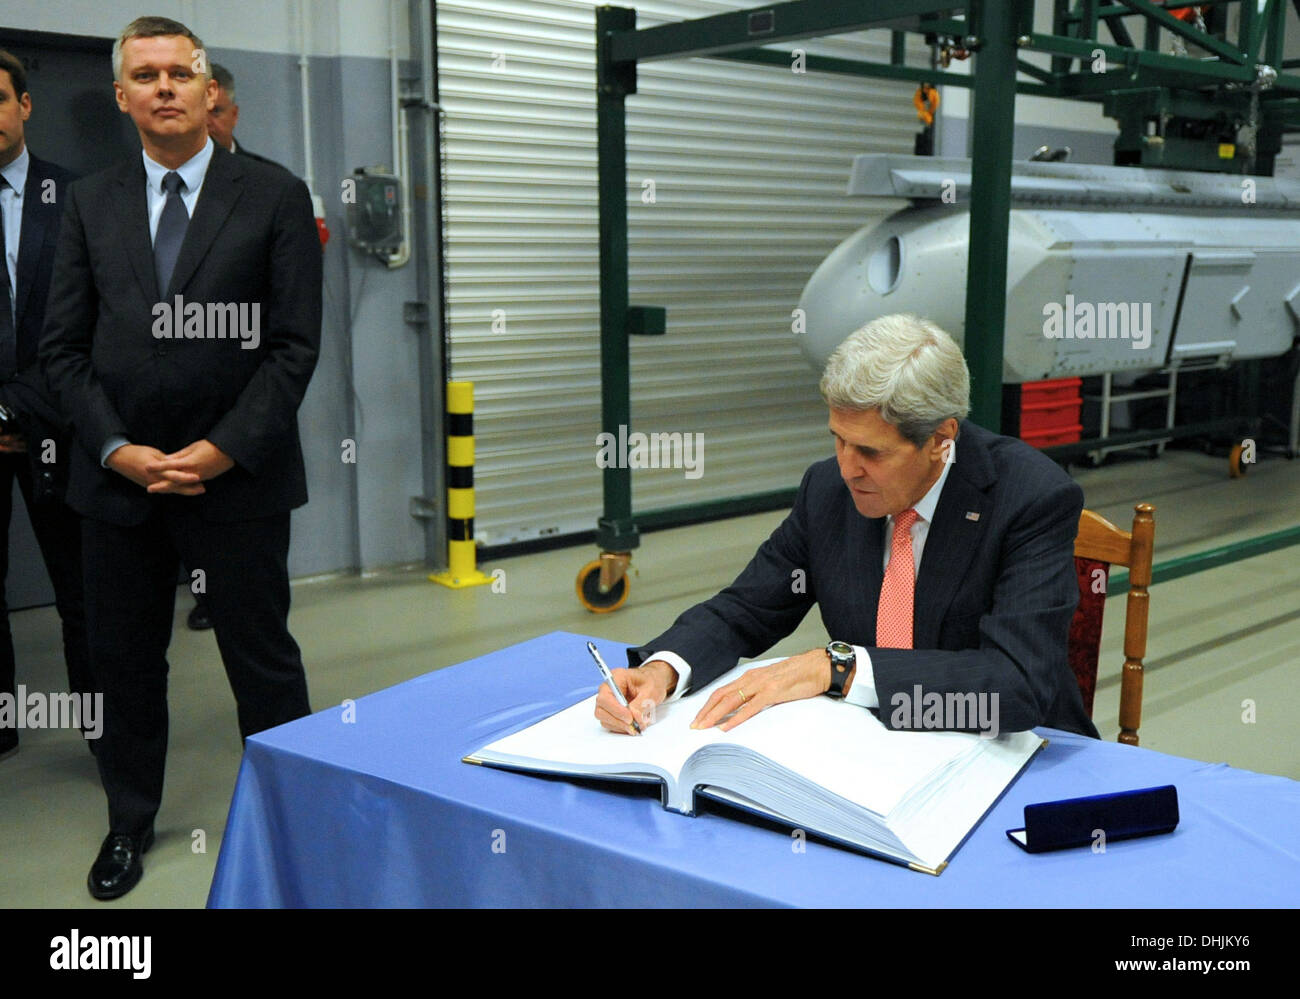 Secretary Kerry Signs the Guestbook at the Lask Polish Airbase Stock Photo